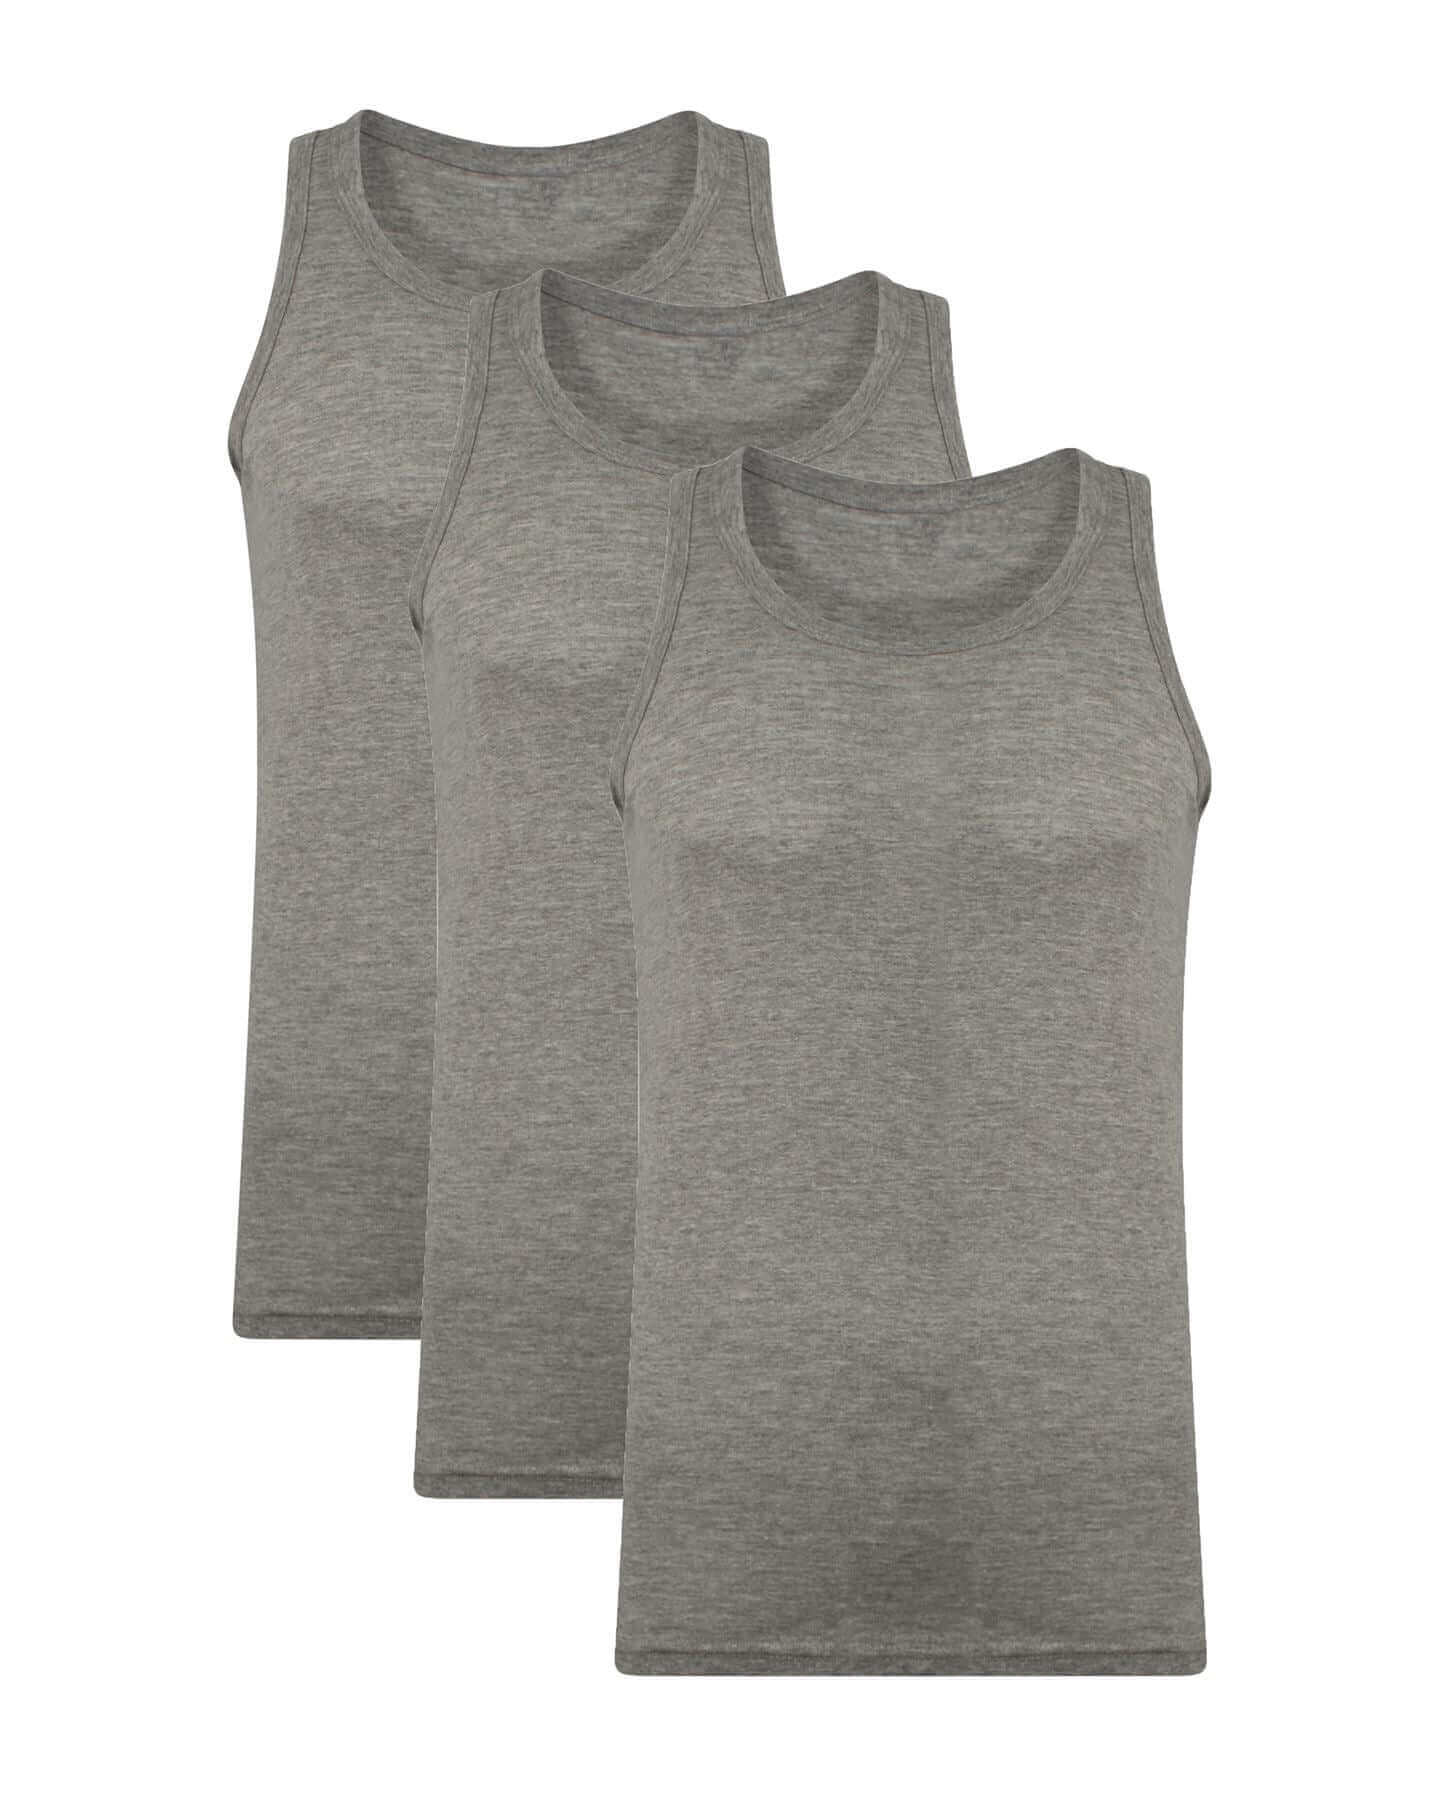 Pack of 3 Men's Vest Fitted Plain 100% Cotton White, Black & Grey. Buy now for £7.00. A Vests by Sock Stack. athletics, black, boys, clothing, comfortable, cotton, grey, gym, man, medium, mens, small, sports, summer, underwear, vests, white, x large, xx l